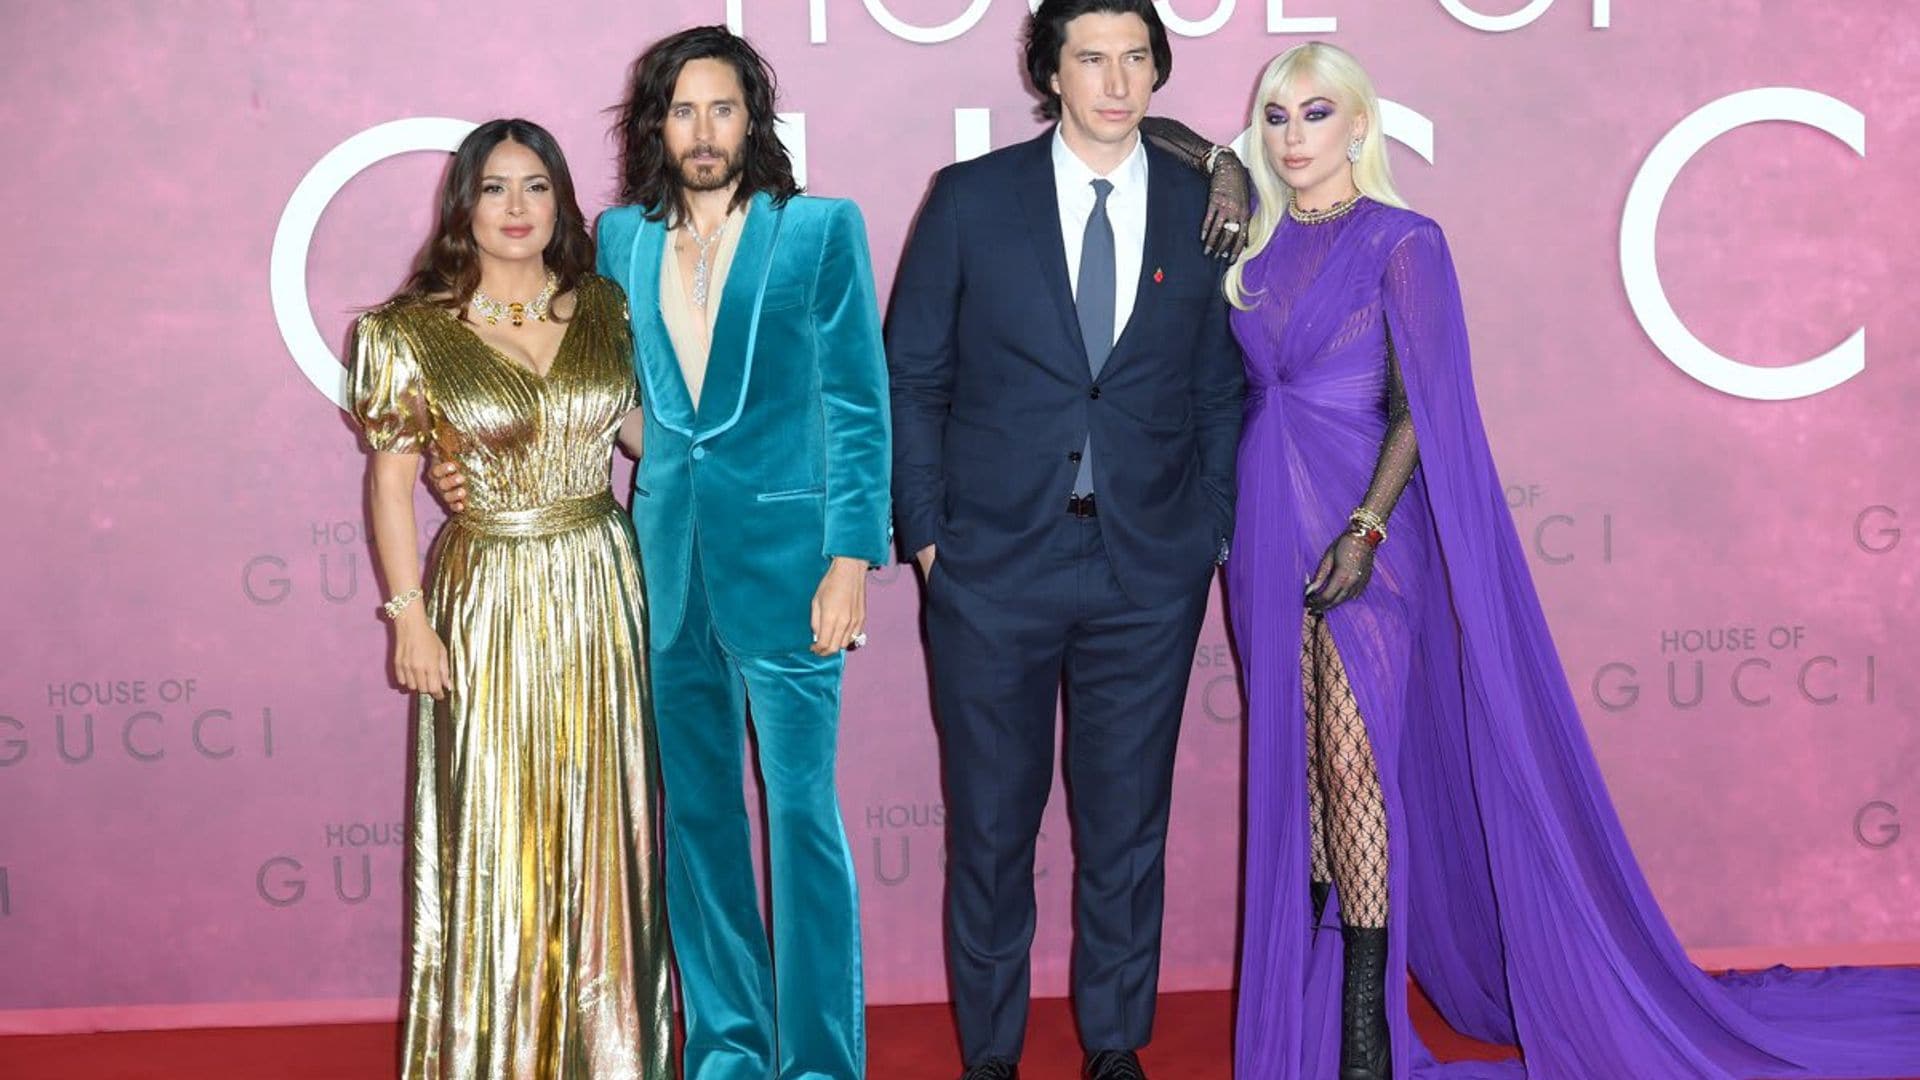 We can't stop looking at 'House Of Gucci' stars Salma Hayek and Lady Gaga at the U.K movie premiere